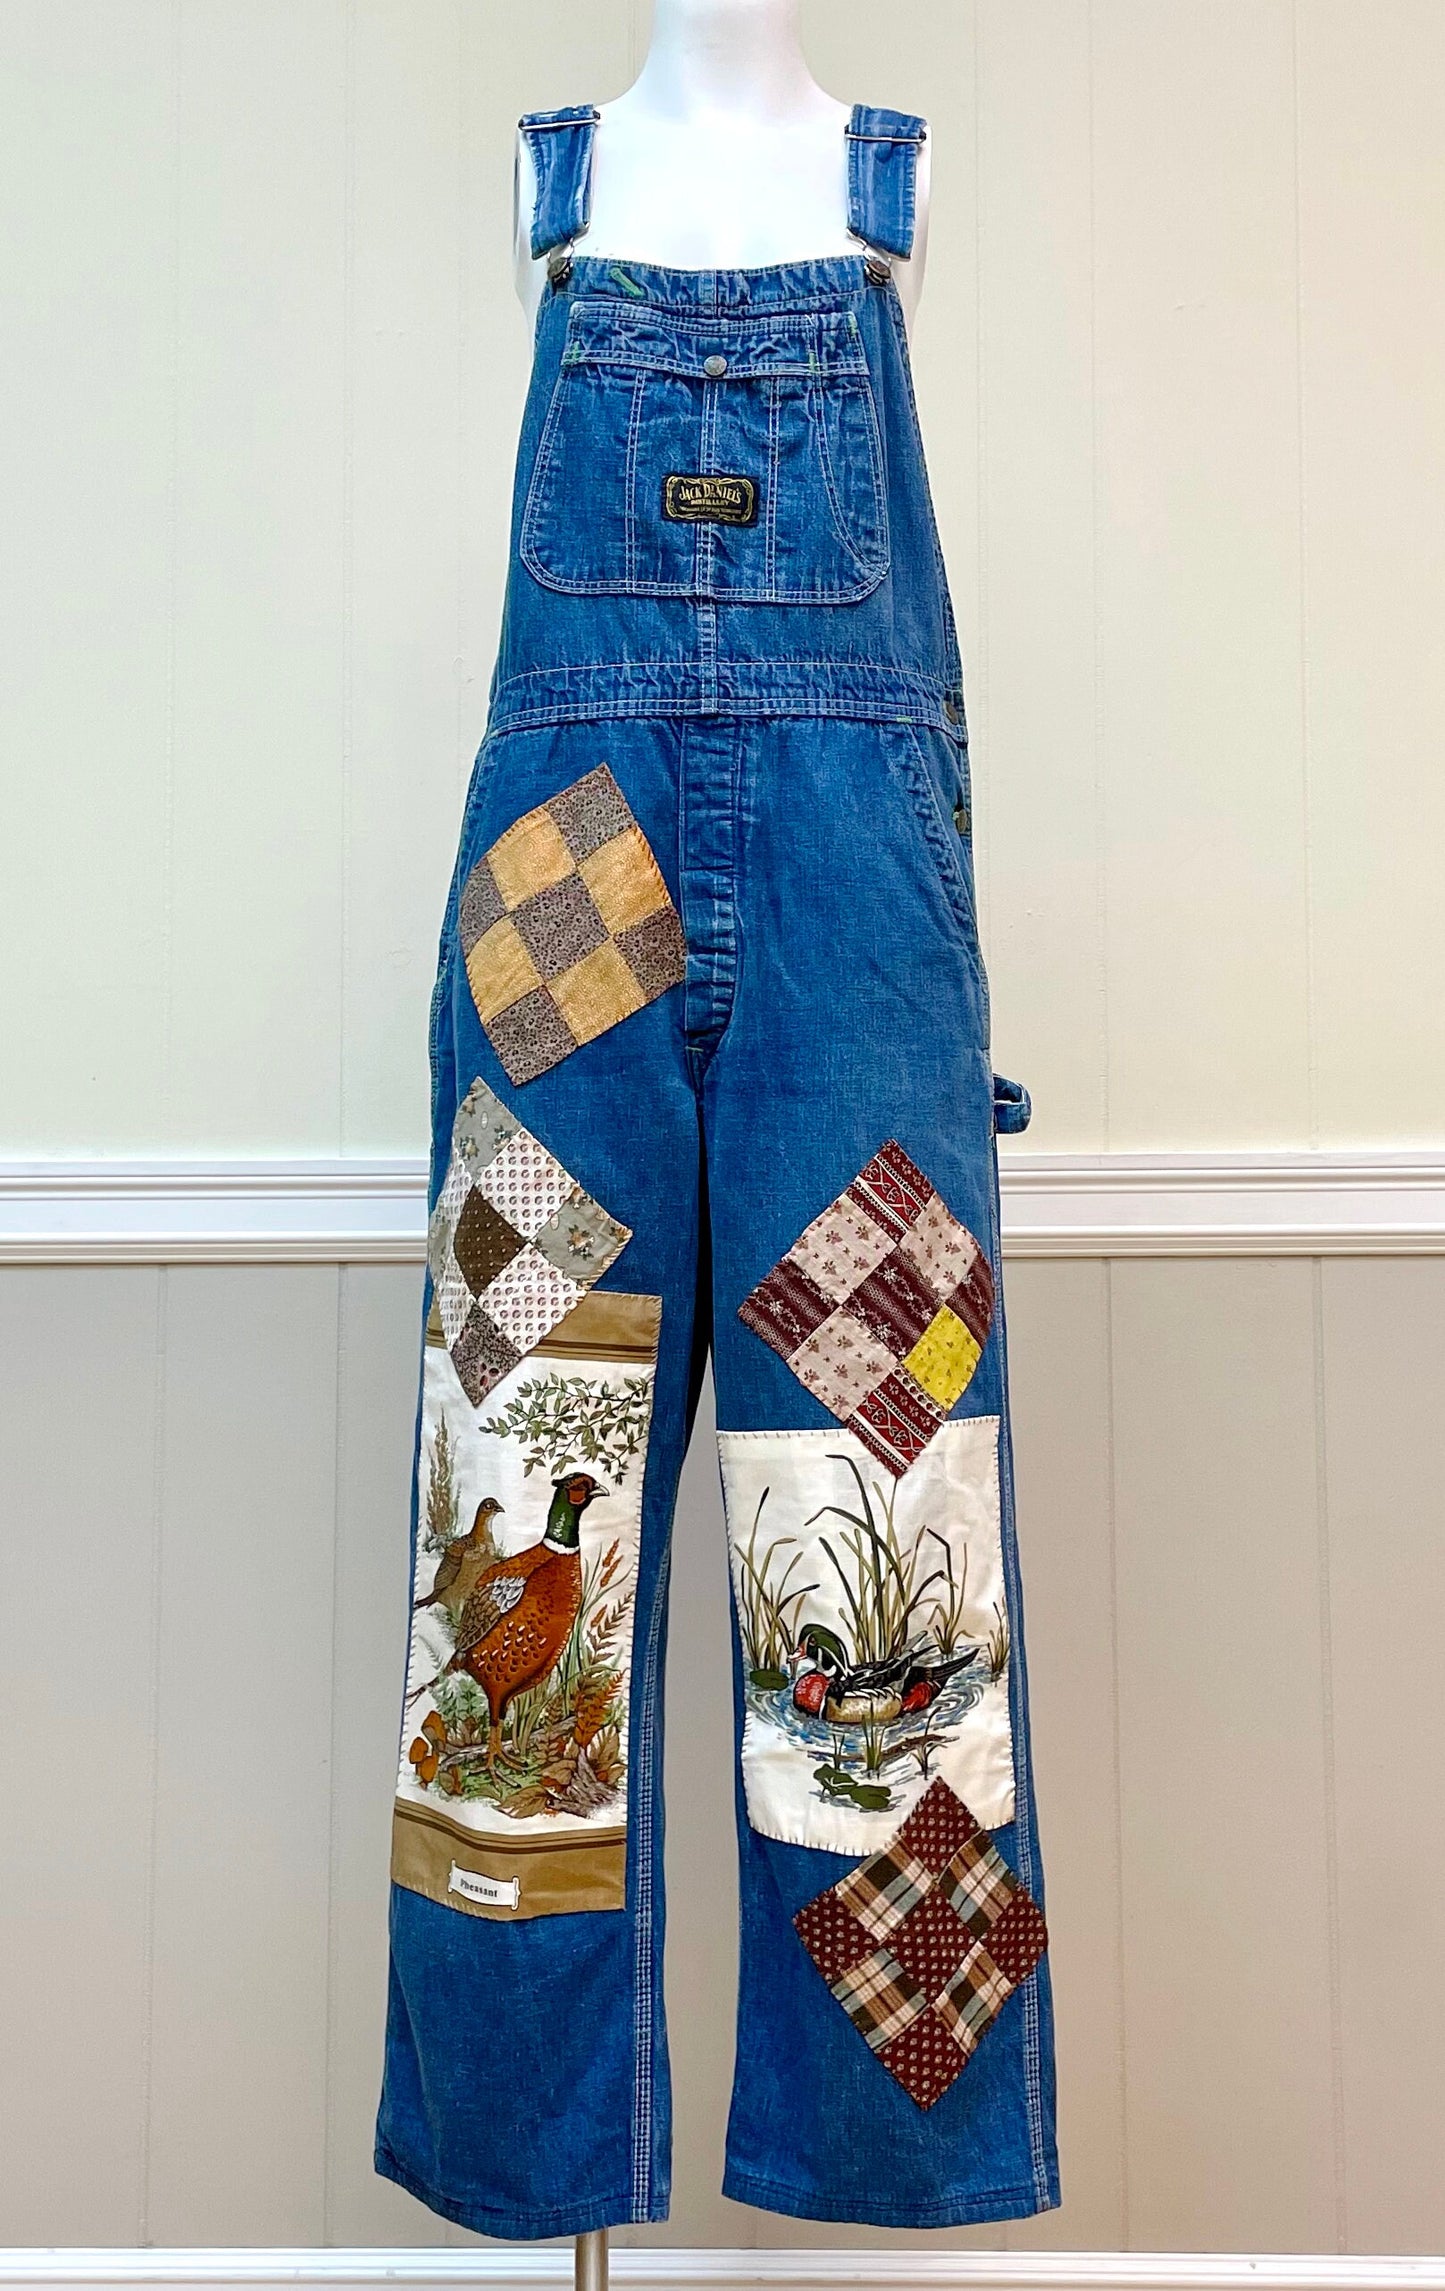 a mannequin wearing overalls with patches on them